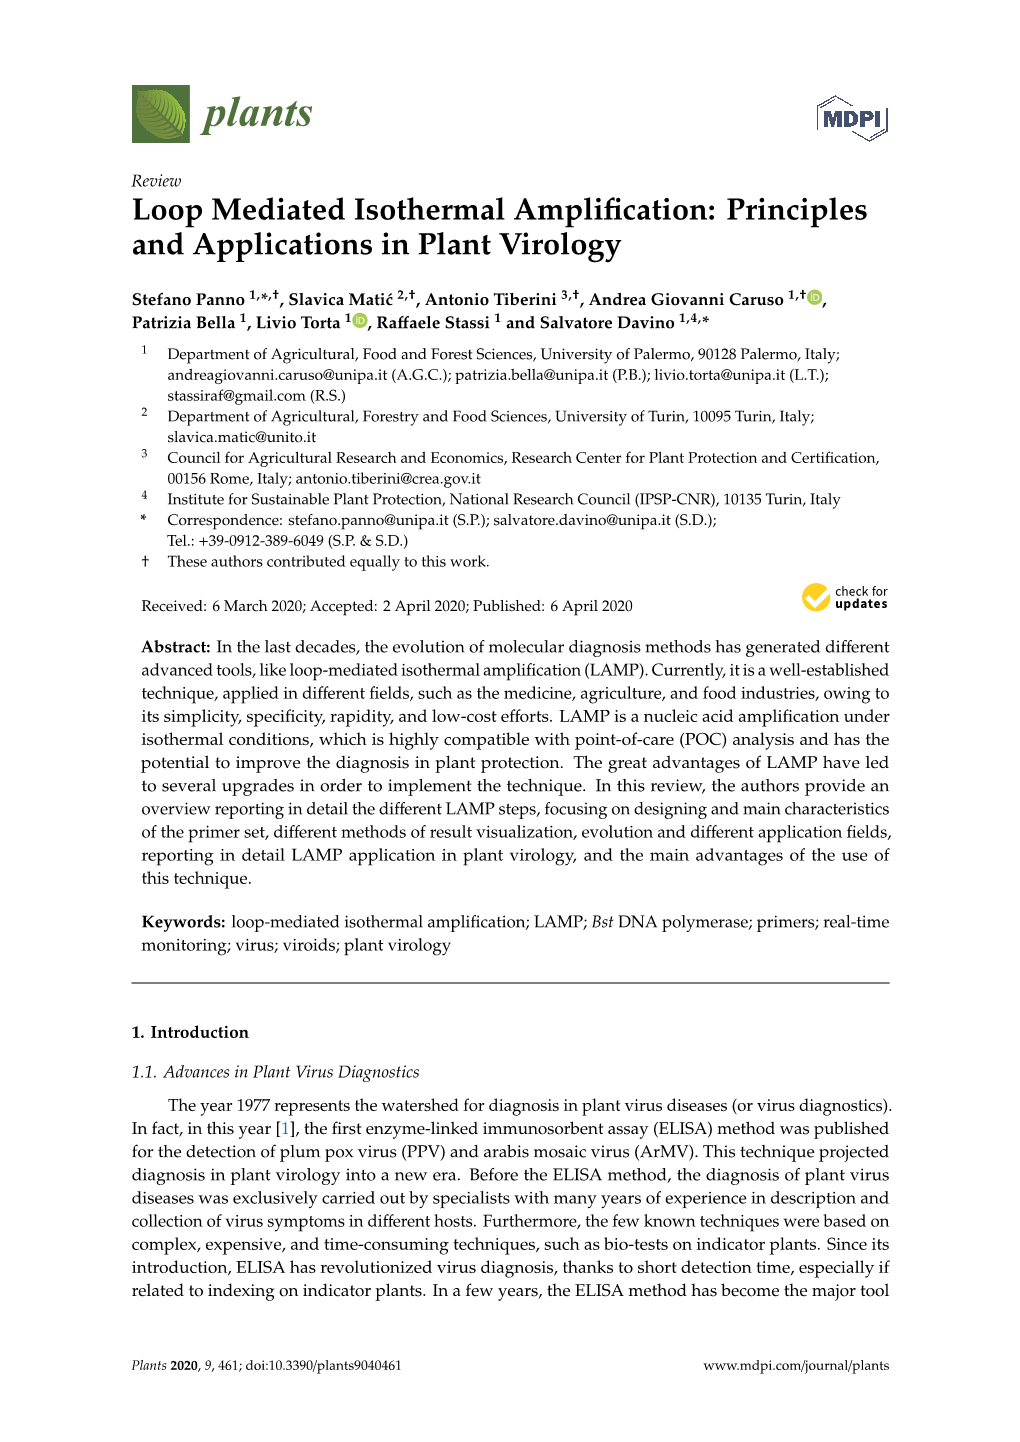 Principles and Applications in Plant Virology